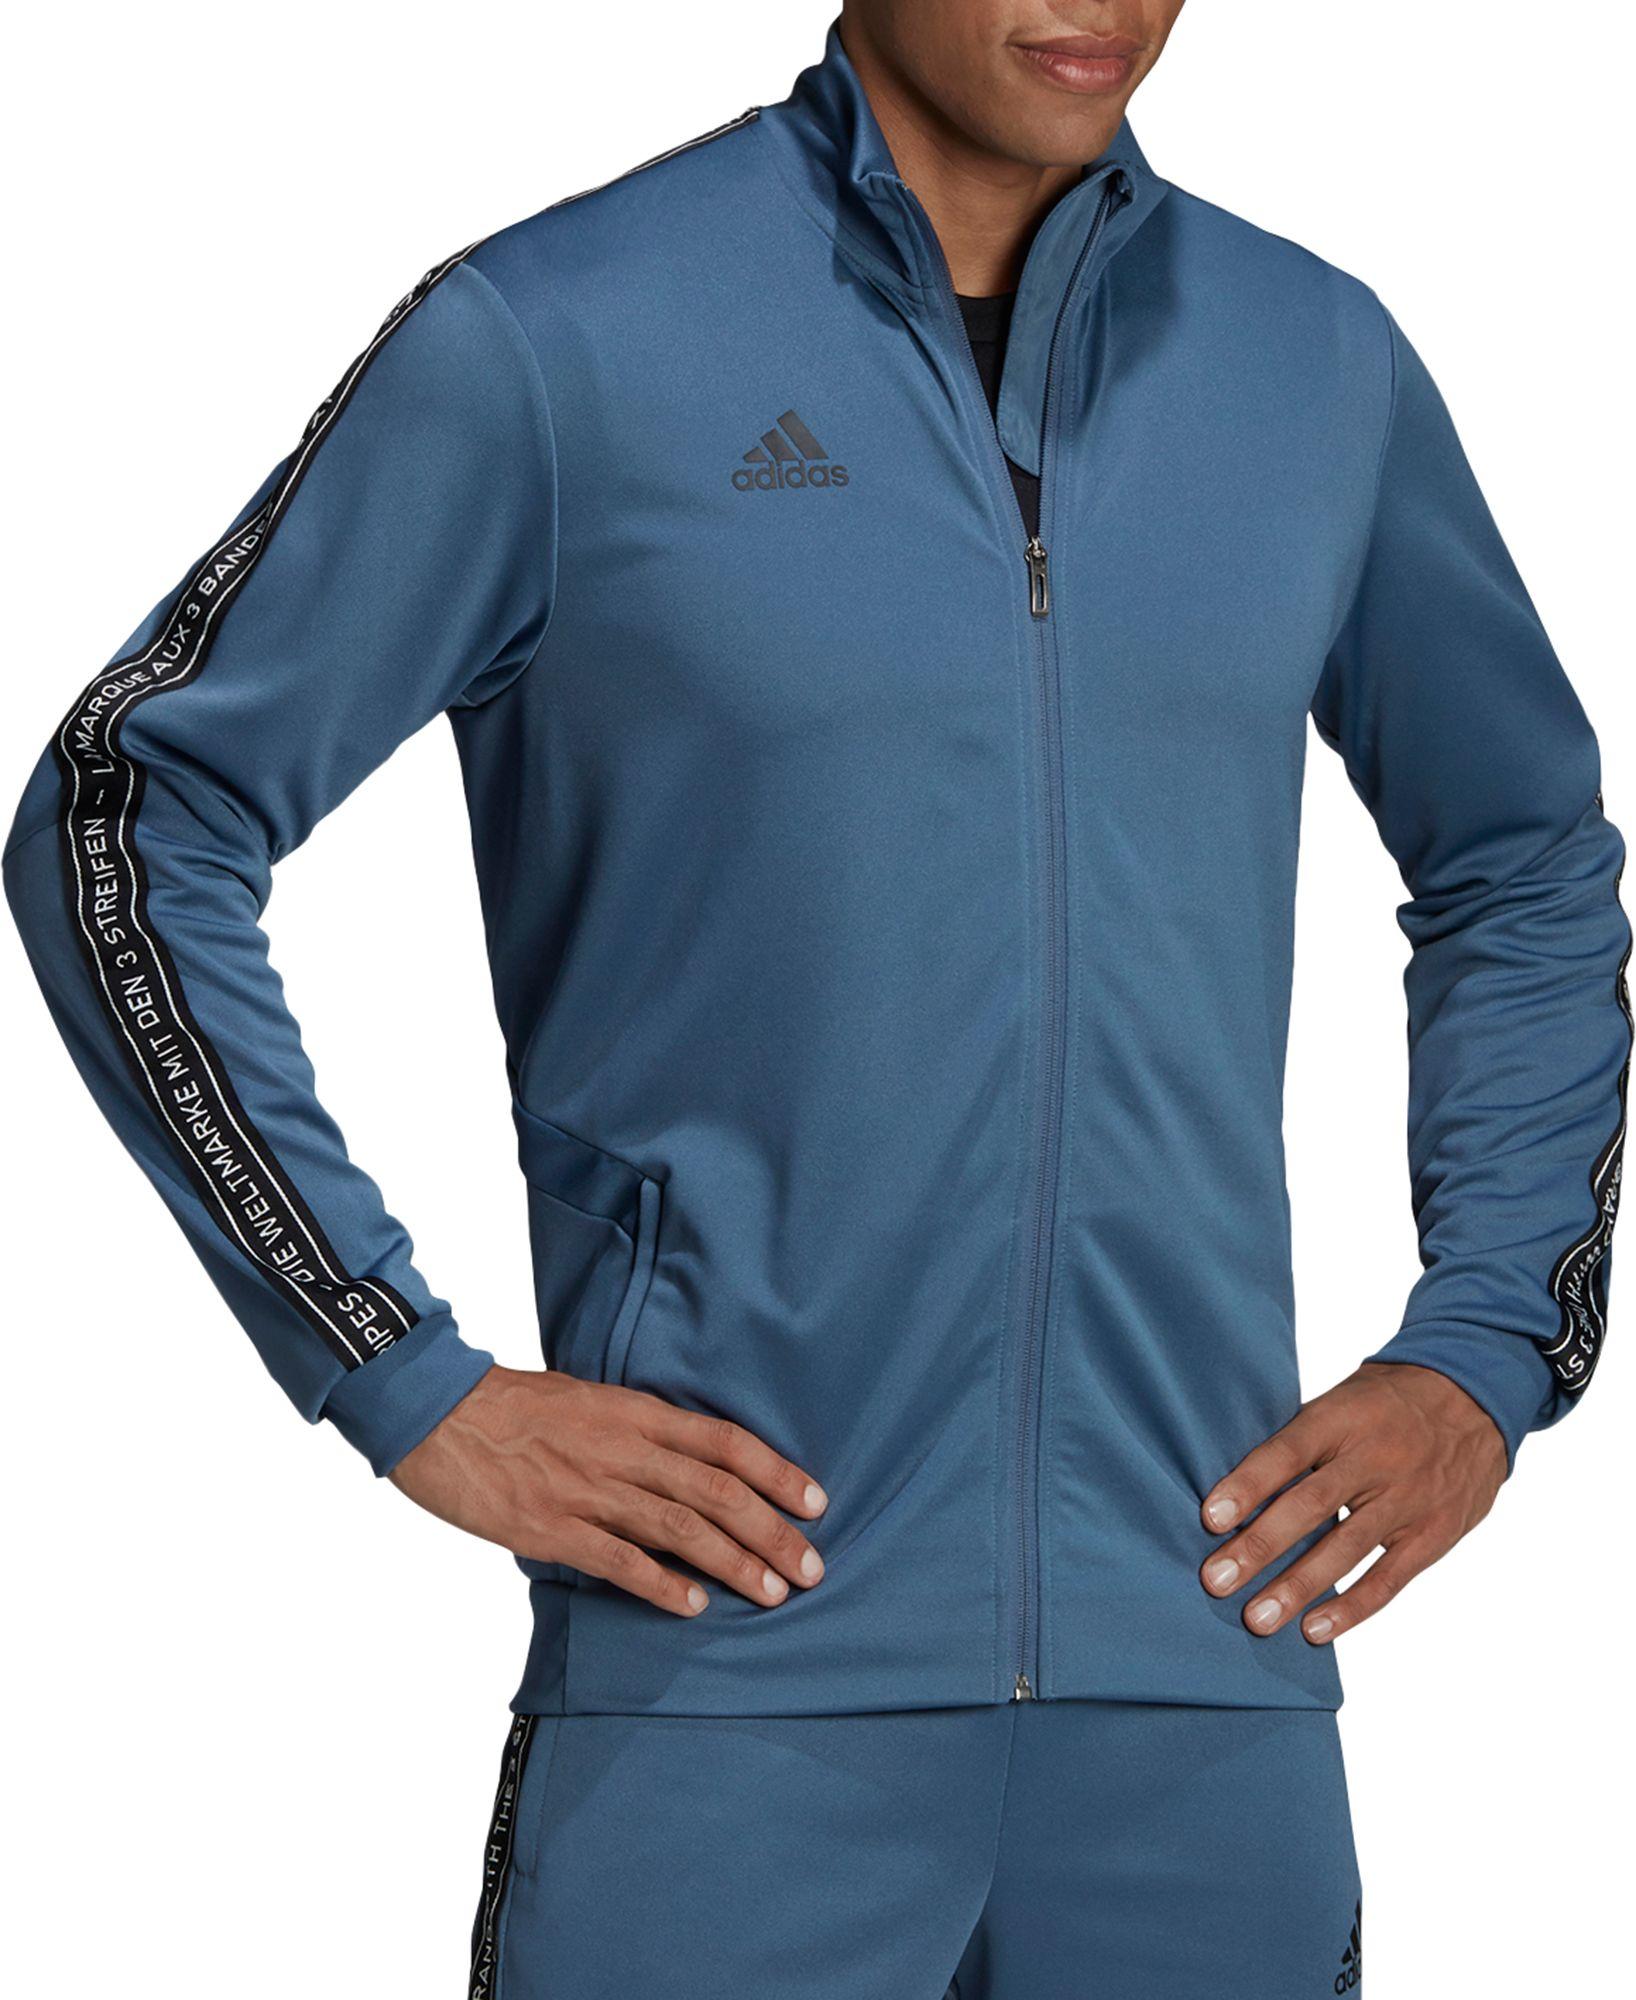 adidas Arsenal Soccer Track Jacket in Blue for Men - Lyst